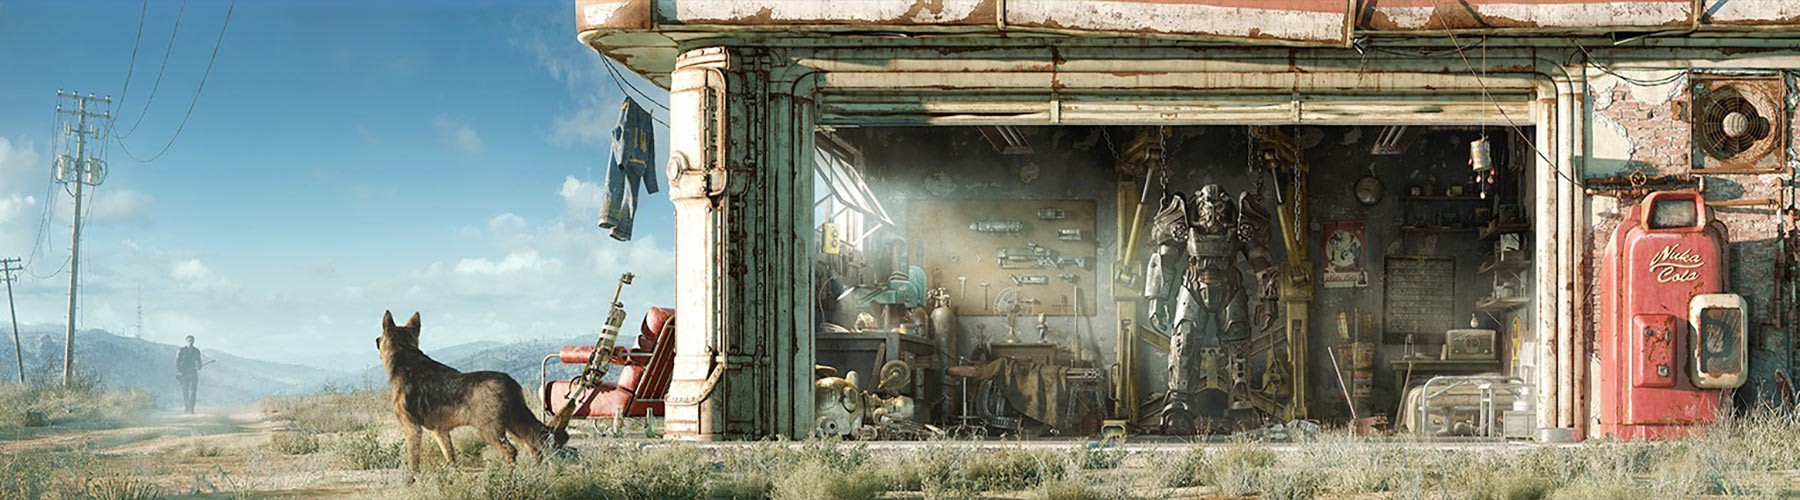 Enbseries fallout 4 download фото 119